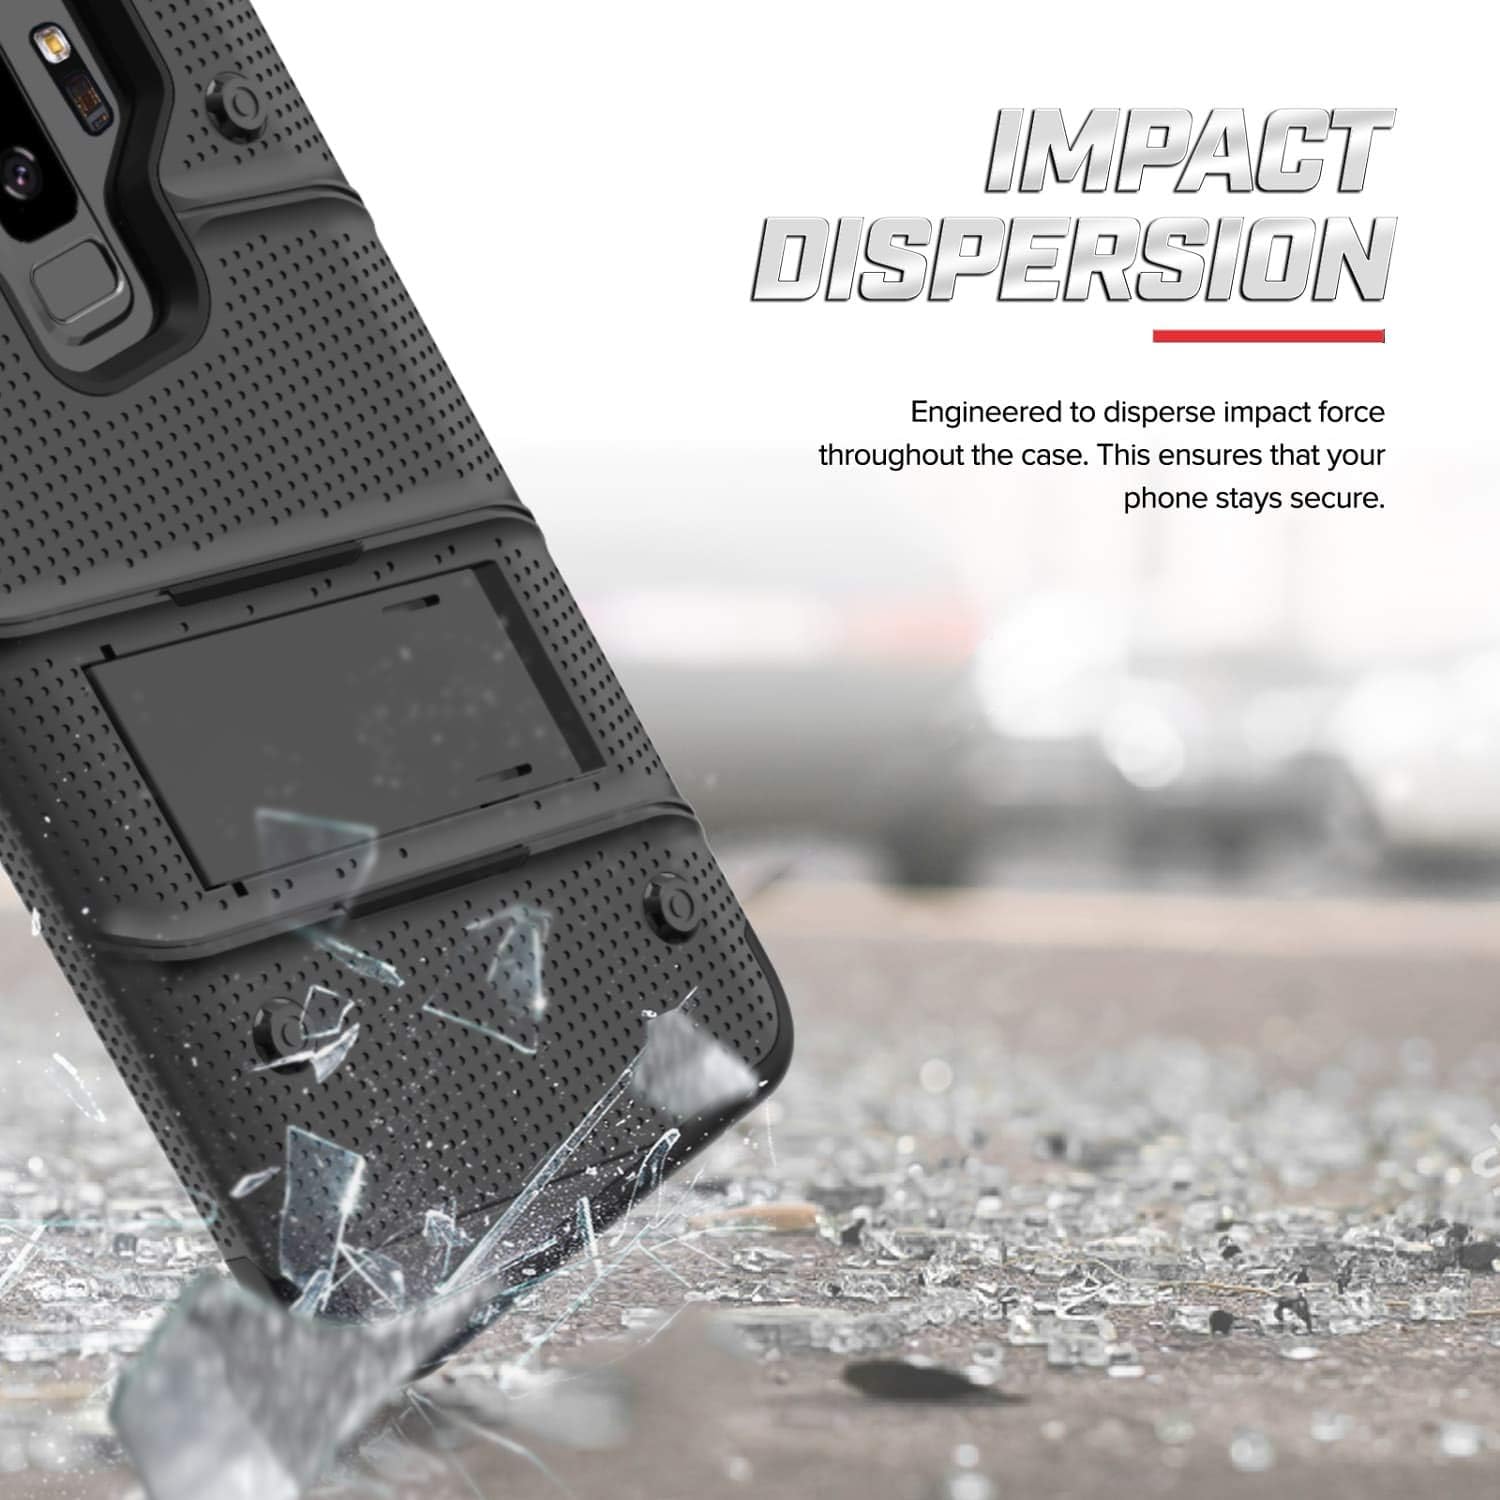 ZIZO Bolt Samsung Galaxy S9 Plus Holster Case with Tempered Glass. Kickstand & Lanyard (2 Colors).